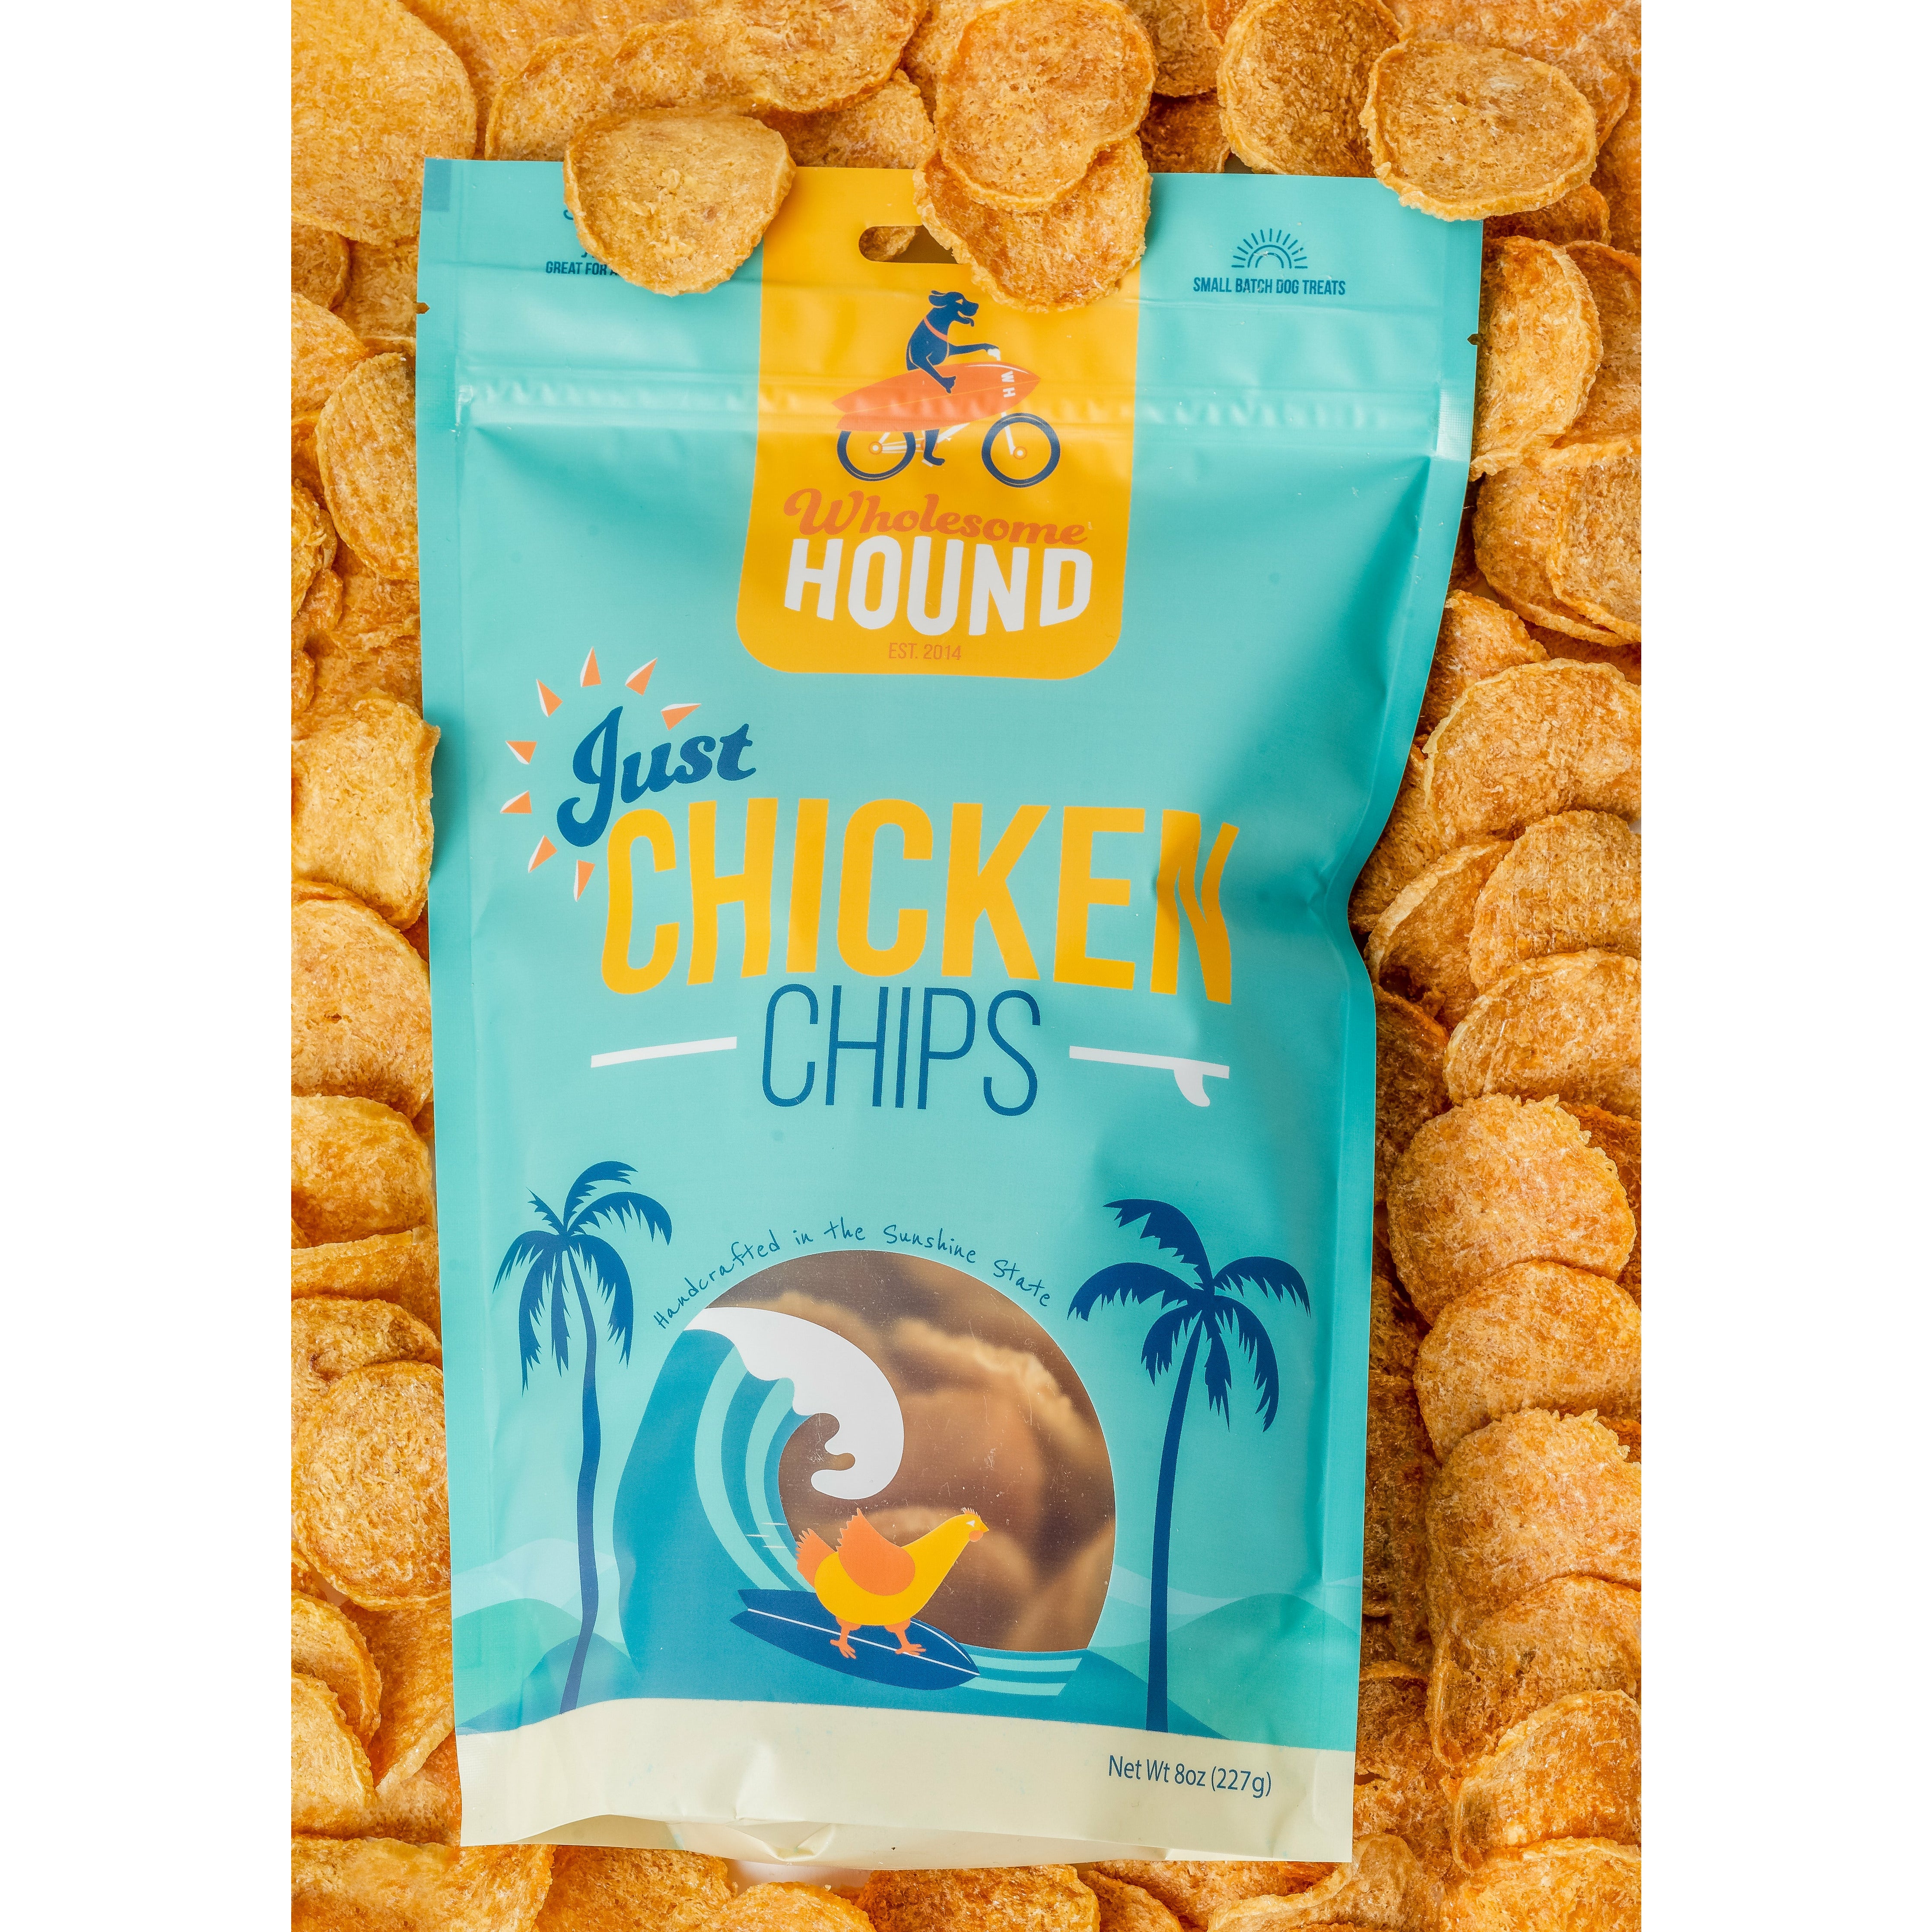 Just Chicken Chips | Dog Treats by Wholesome Hound